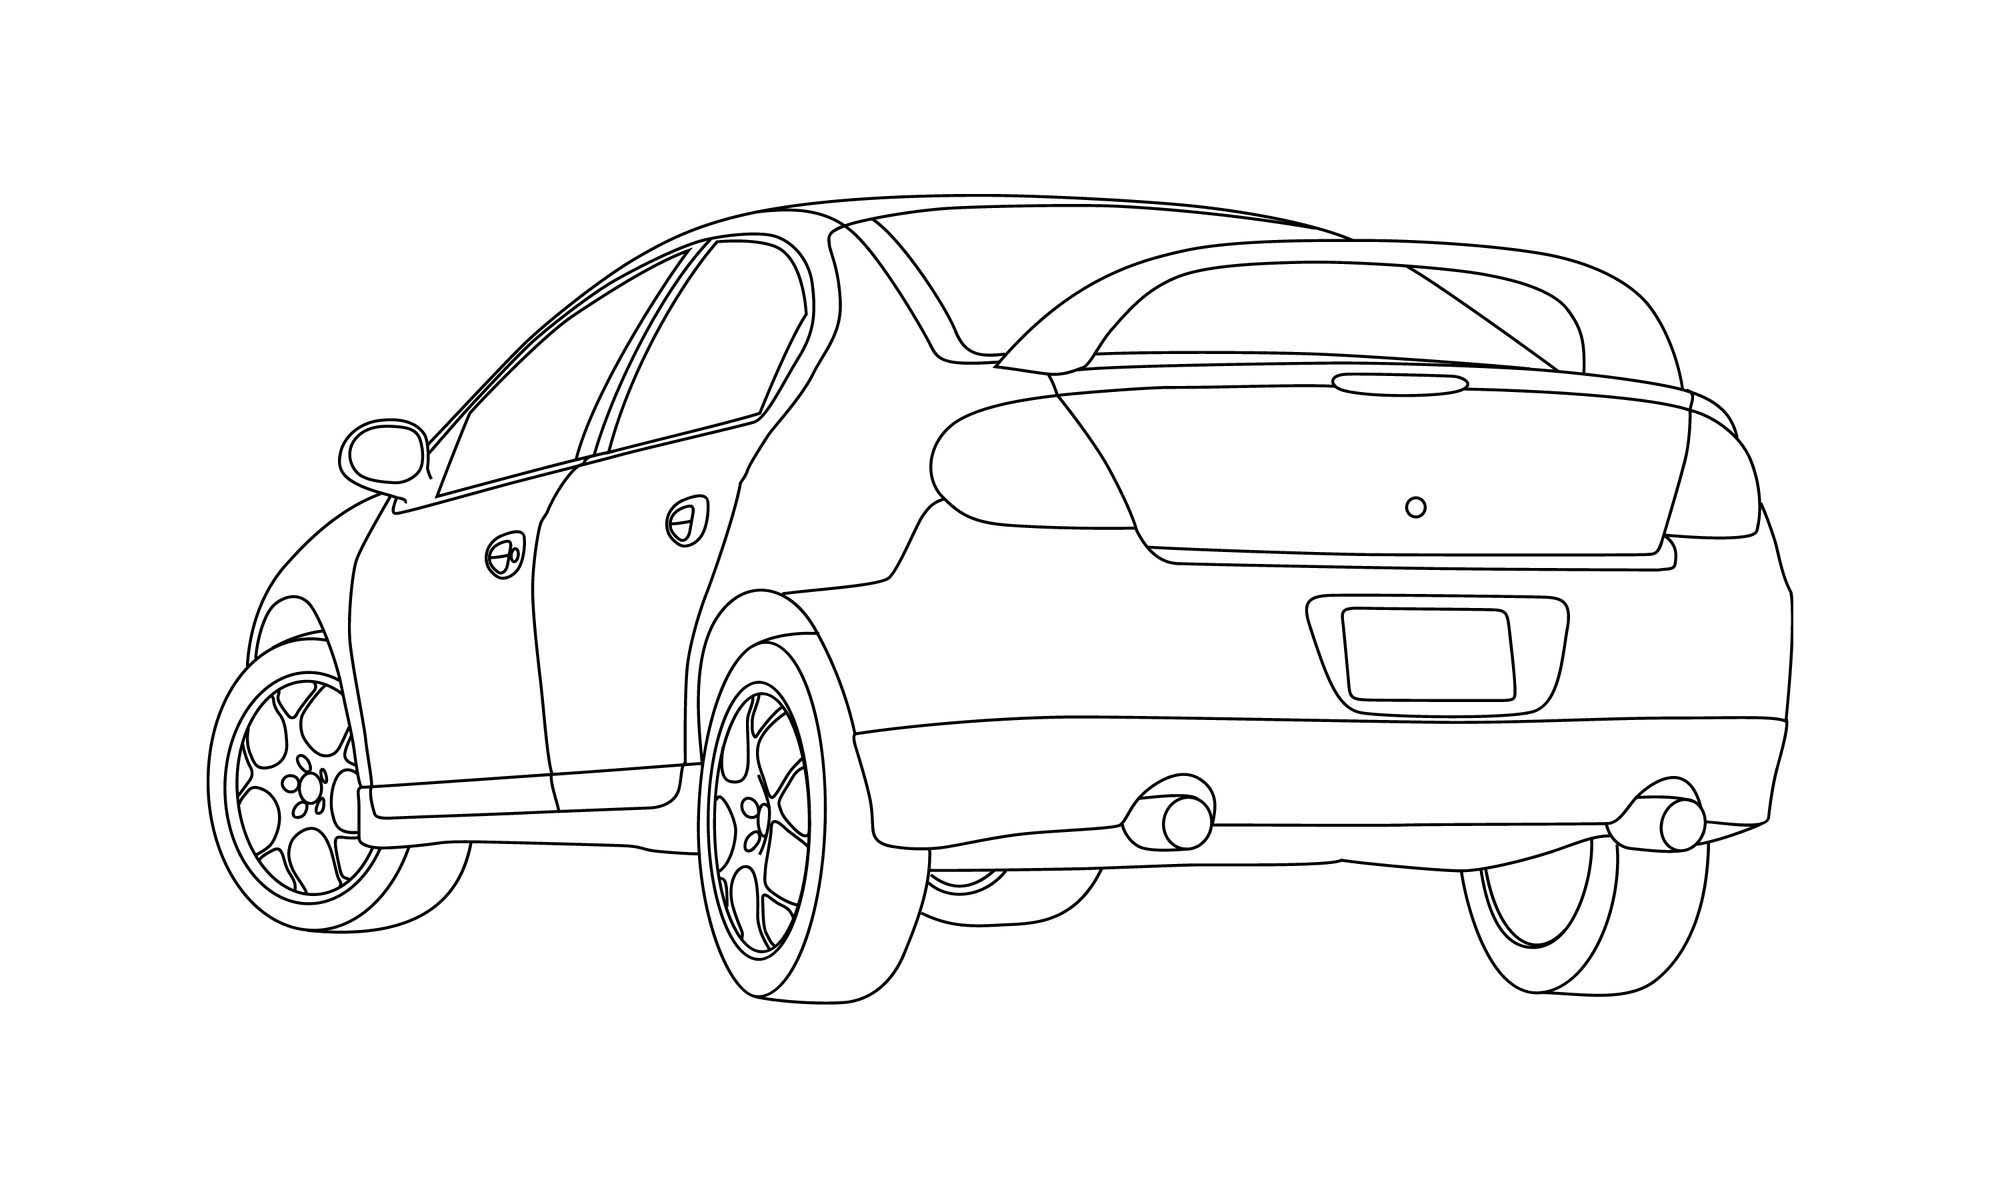 Dodge Ram Coloring Sheets - Coloring Page